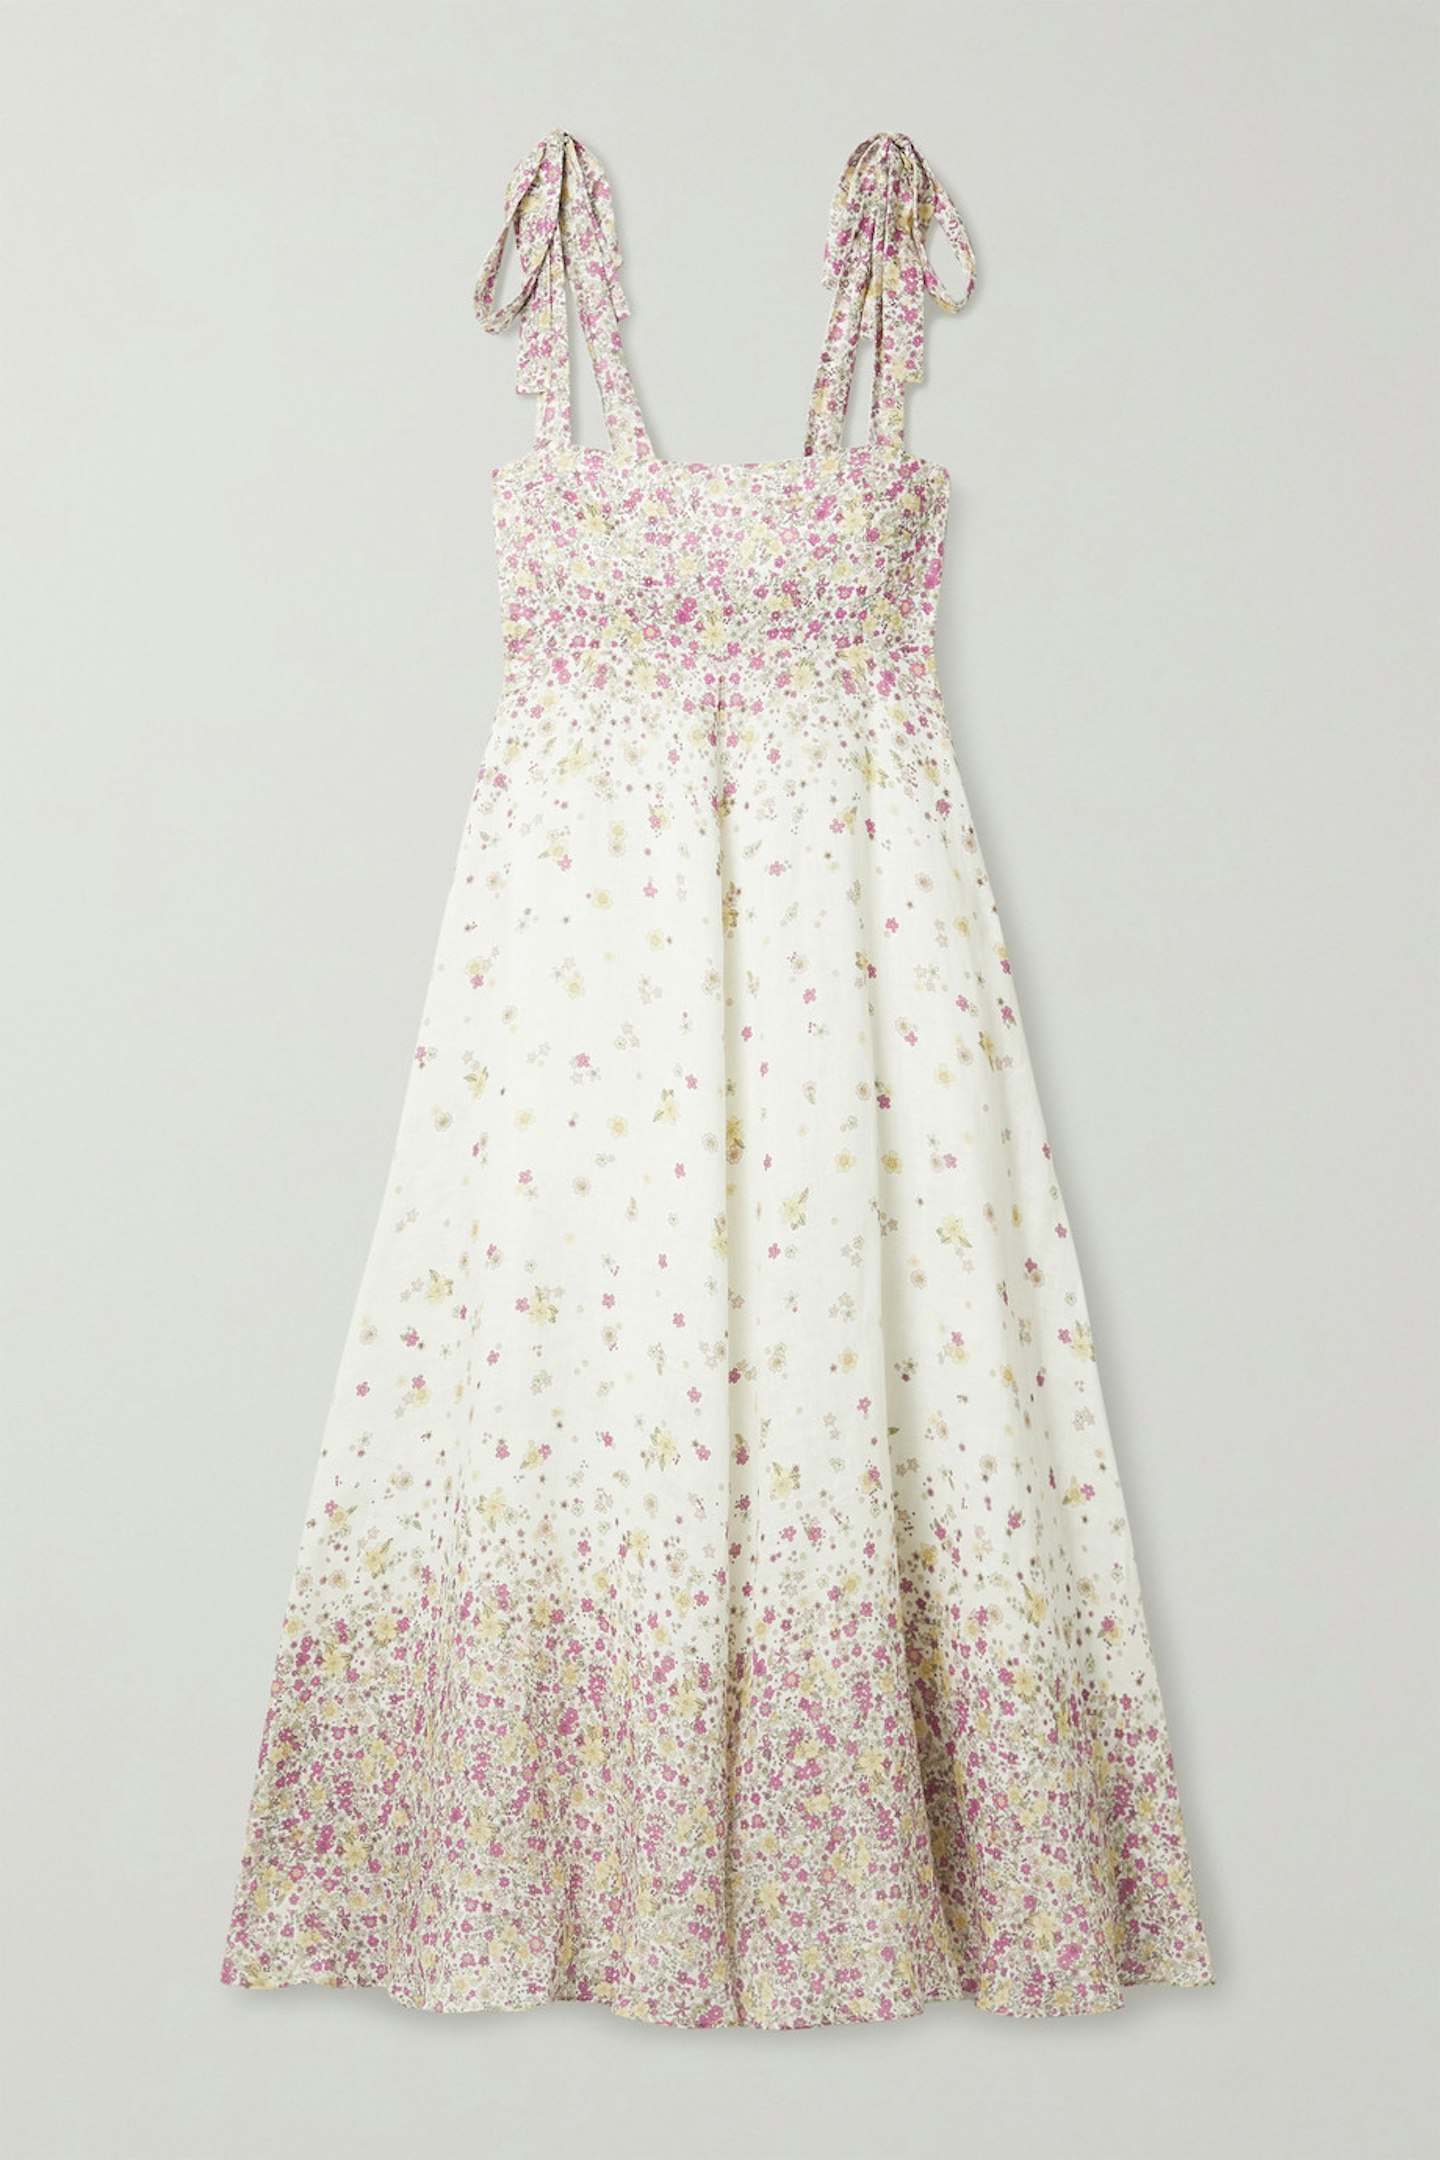 Zimmerman, Carnaby Floral Dress, £635